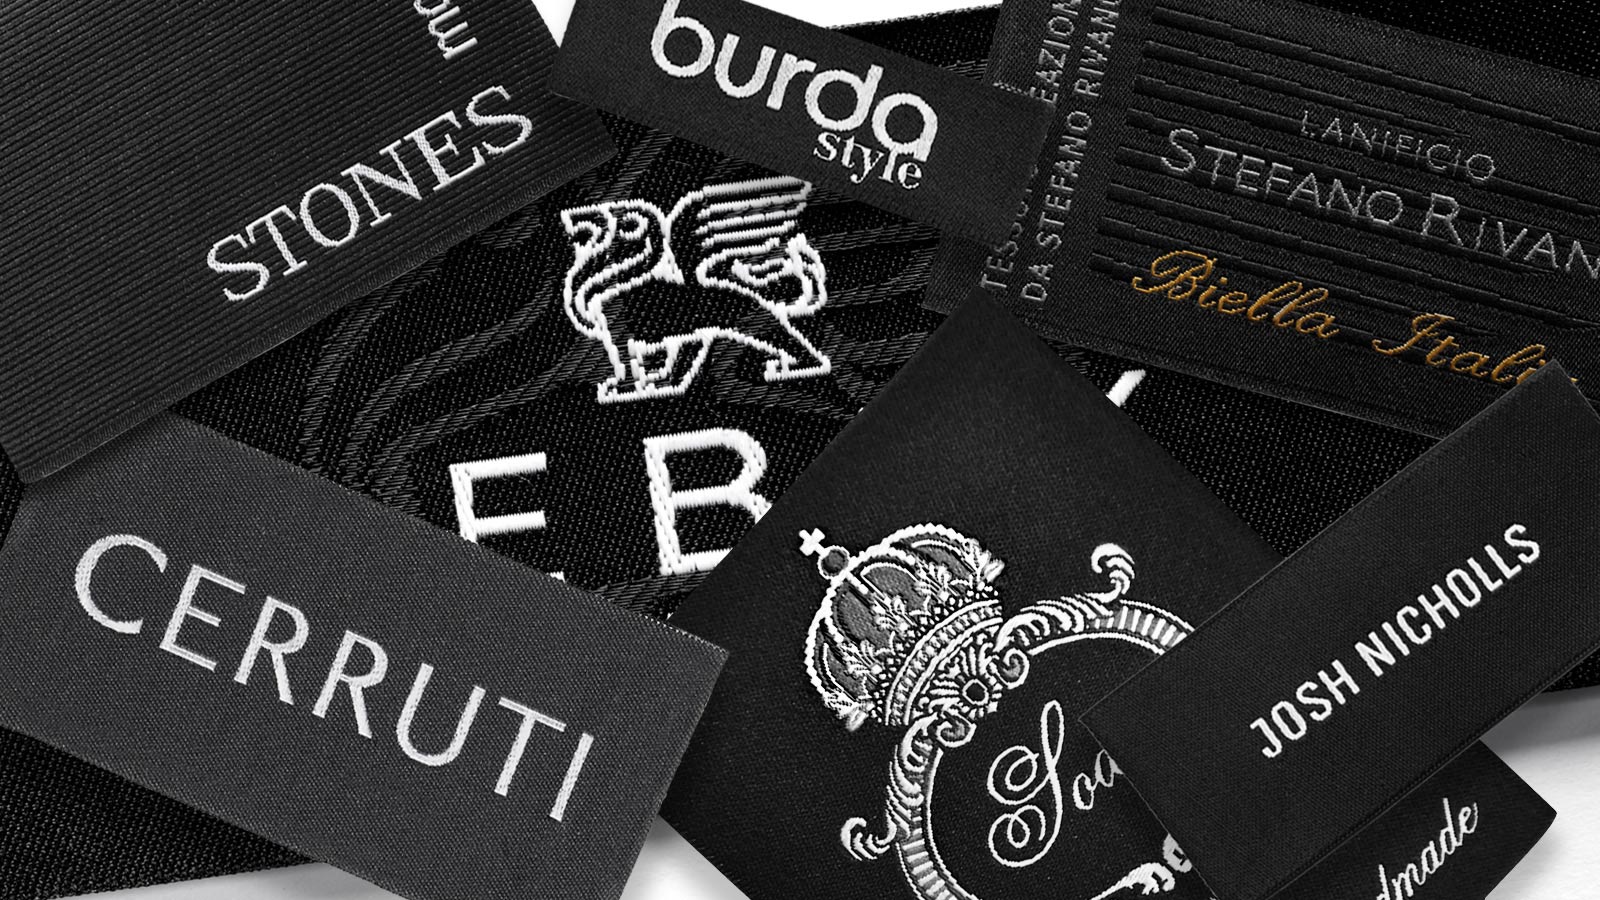 Woven labels are ideal for luxury clothing brands